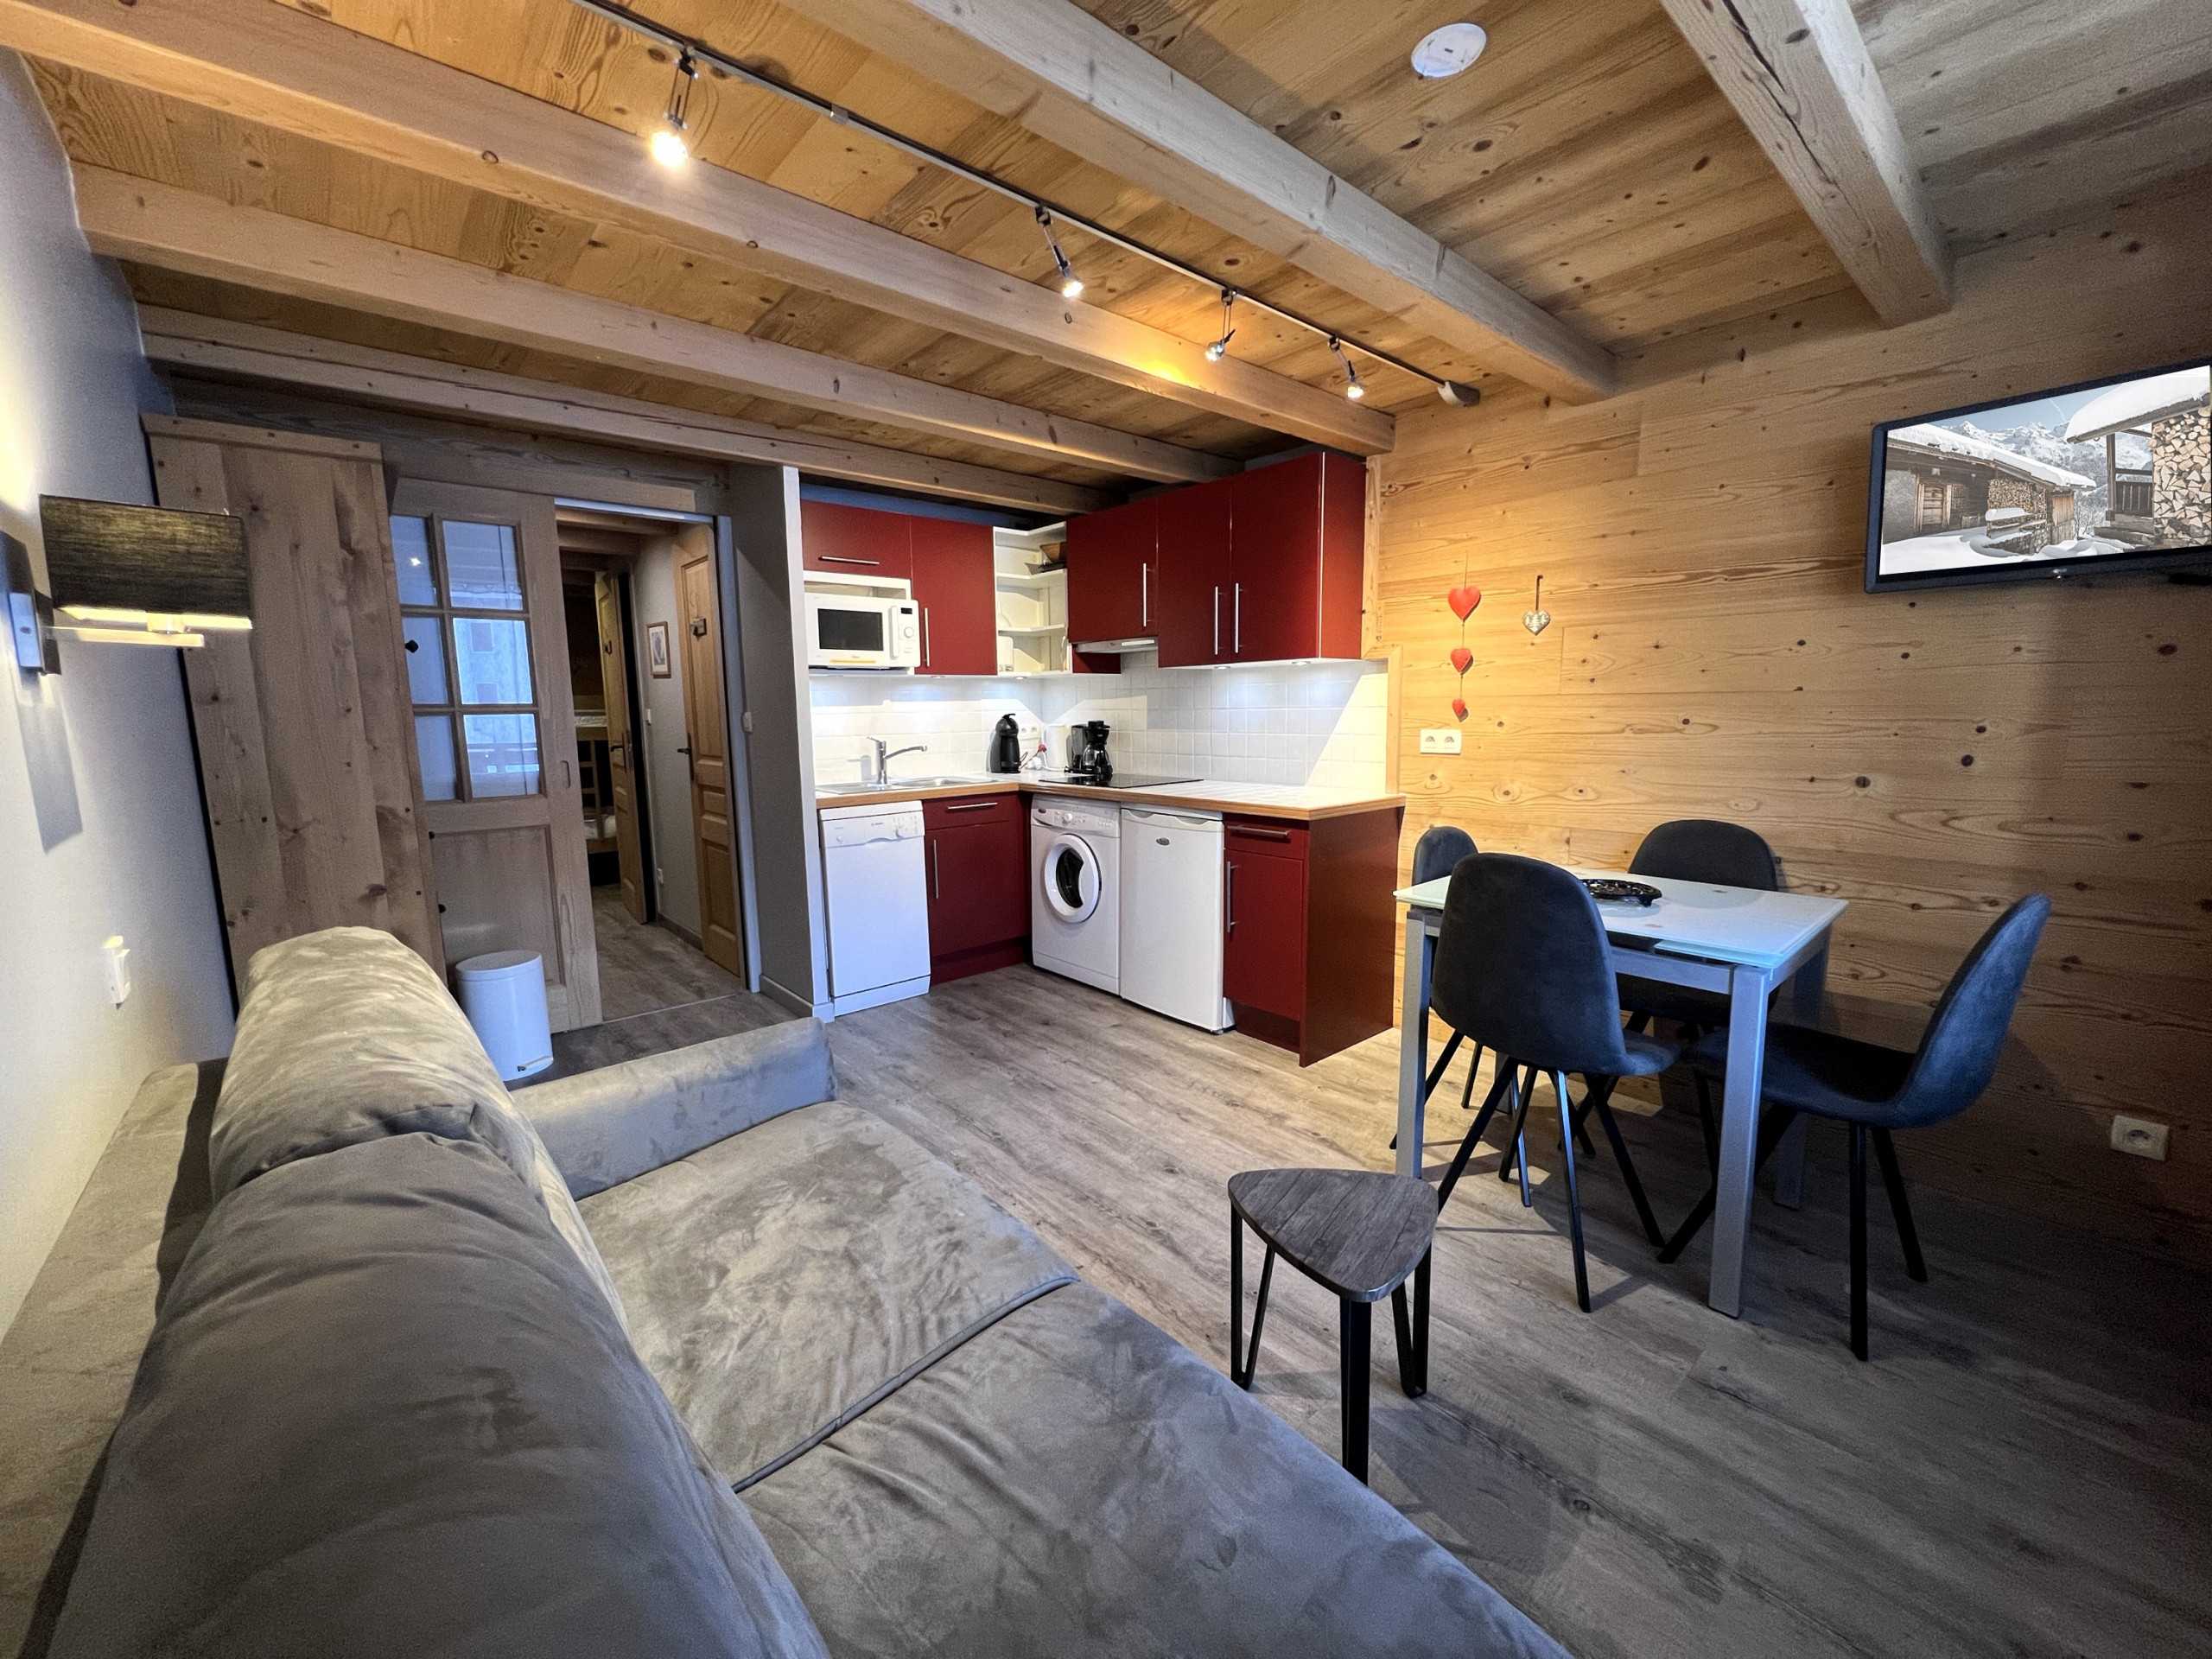  in La Clusaz - Parnasse 203 - Apartment 3* on the ski slope, in the village for 4 people